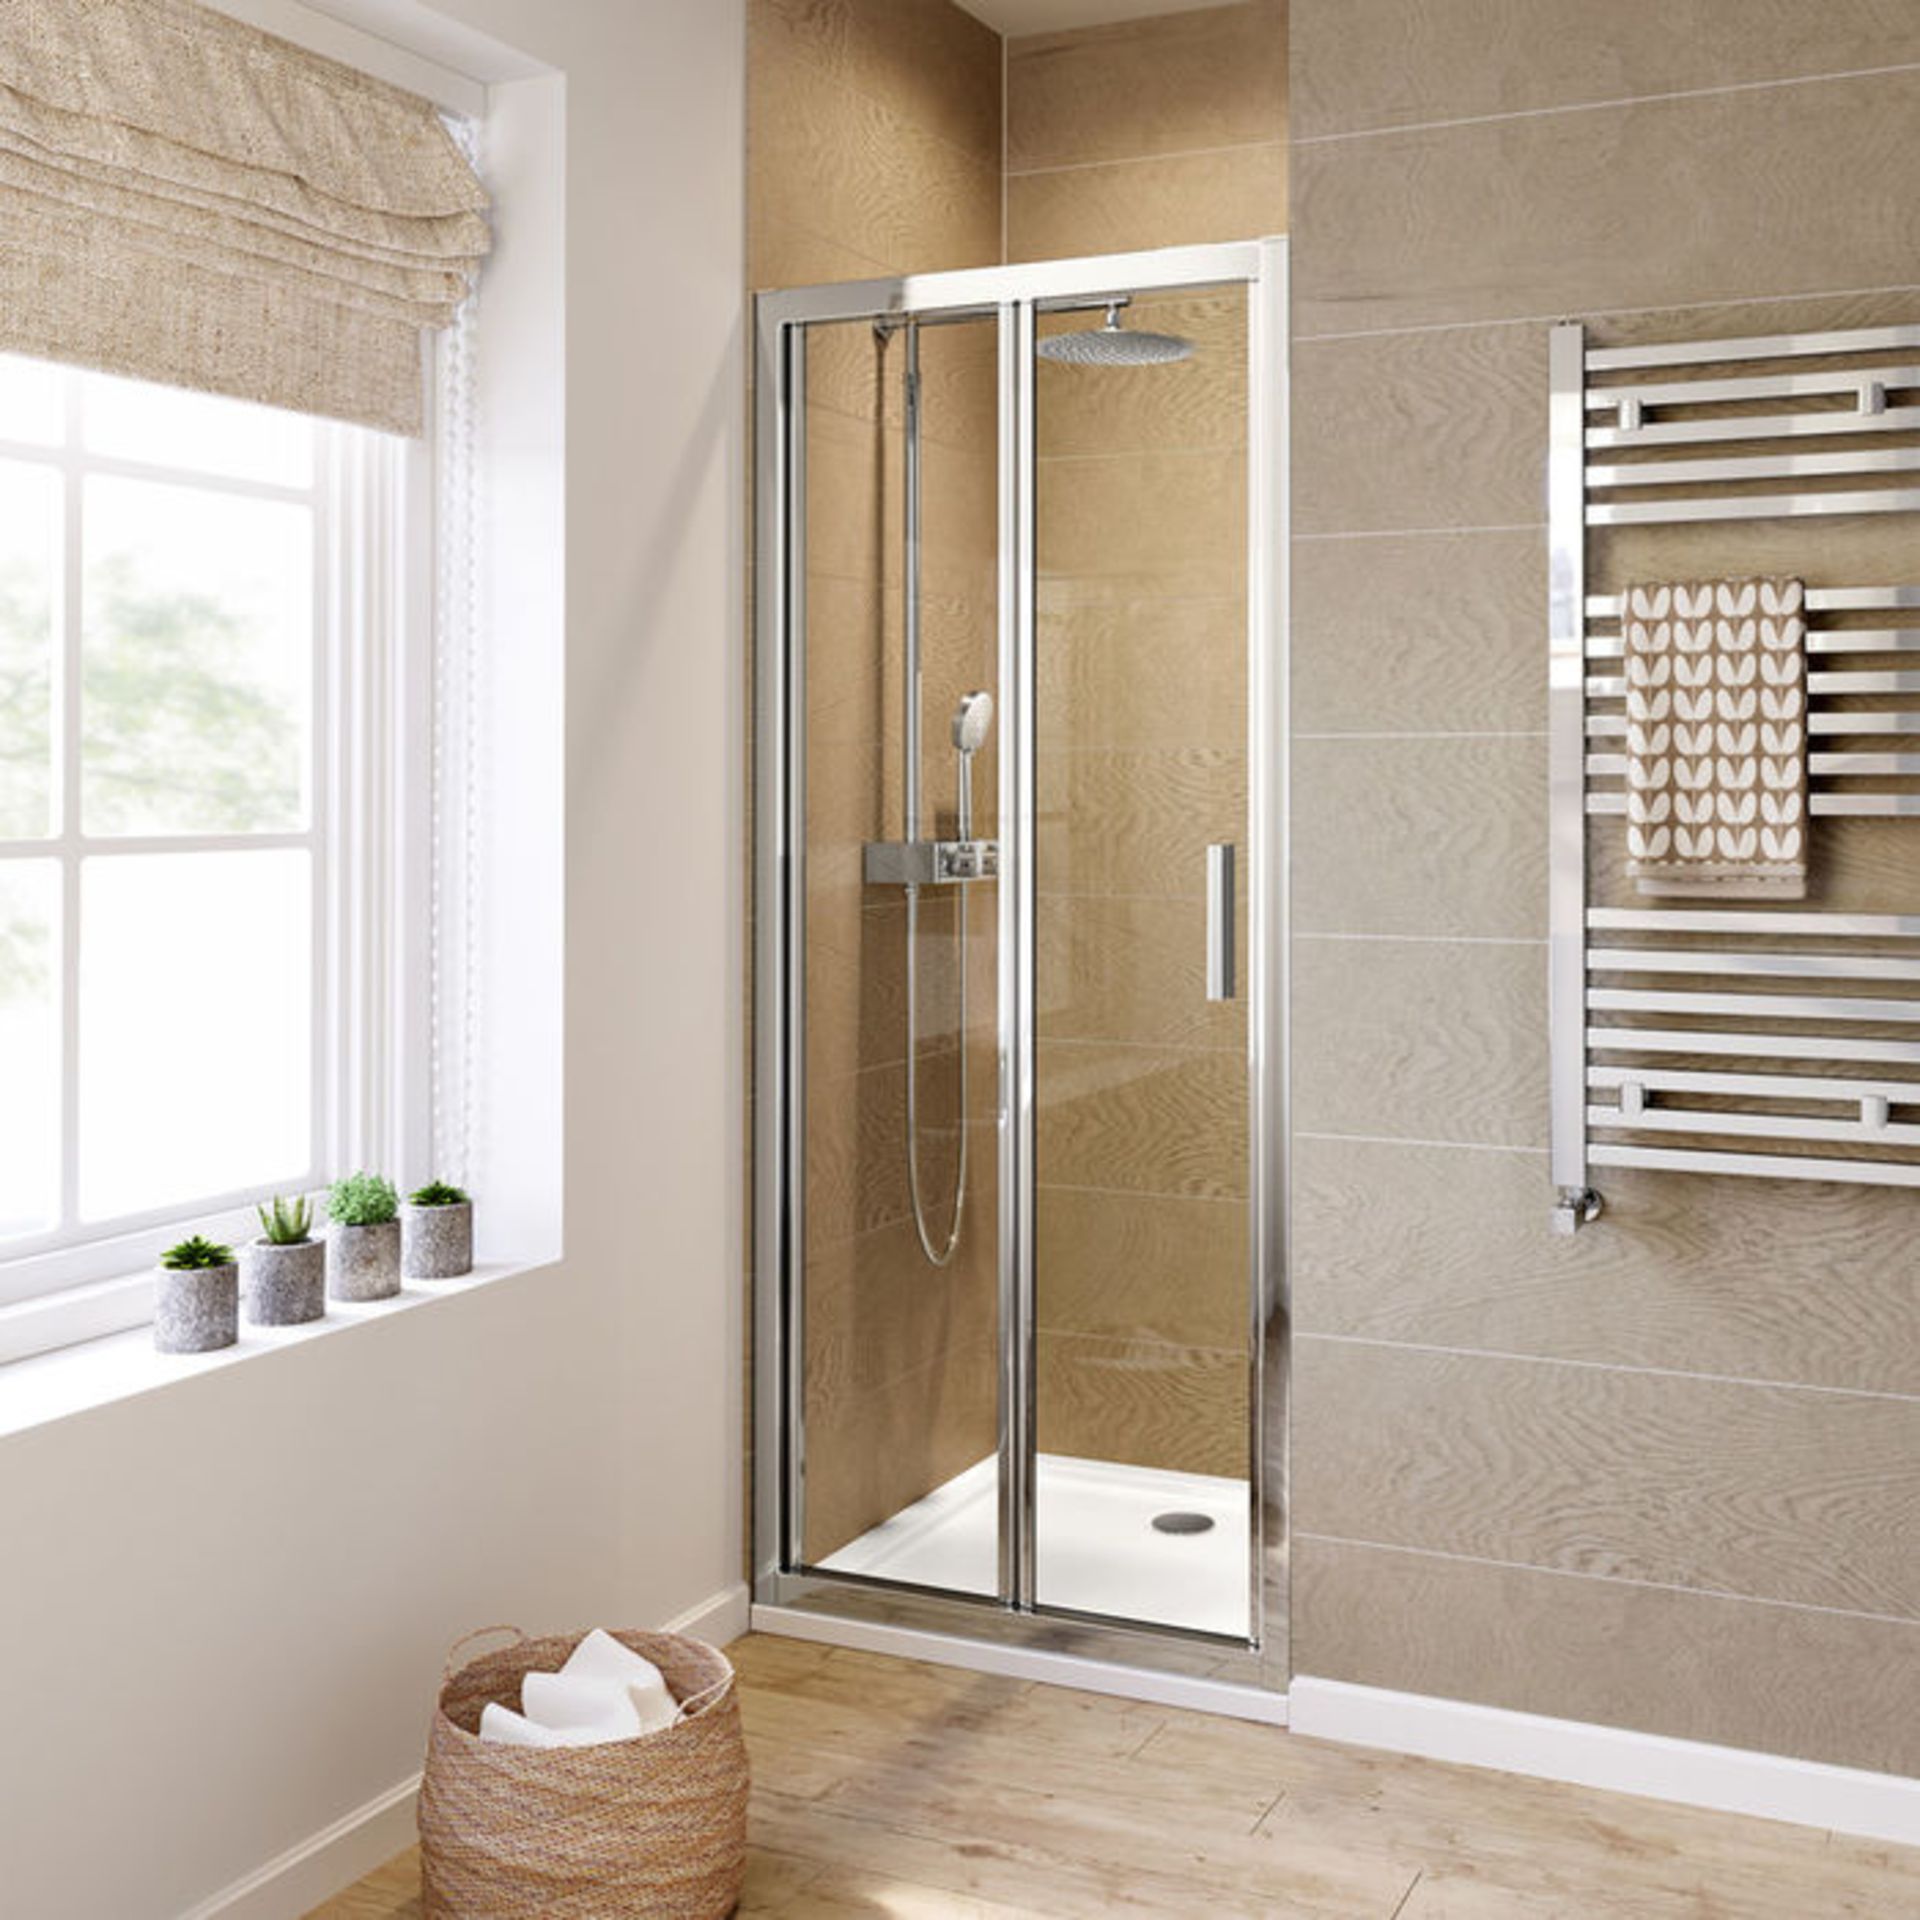 (TY118) 800mm - 6mm - Elements EasyClean Bifold Shower Door. RRP £299.99. 6mm Safety Glass - - Image 2 of 3